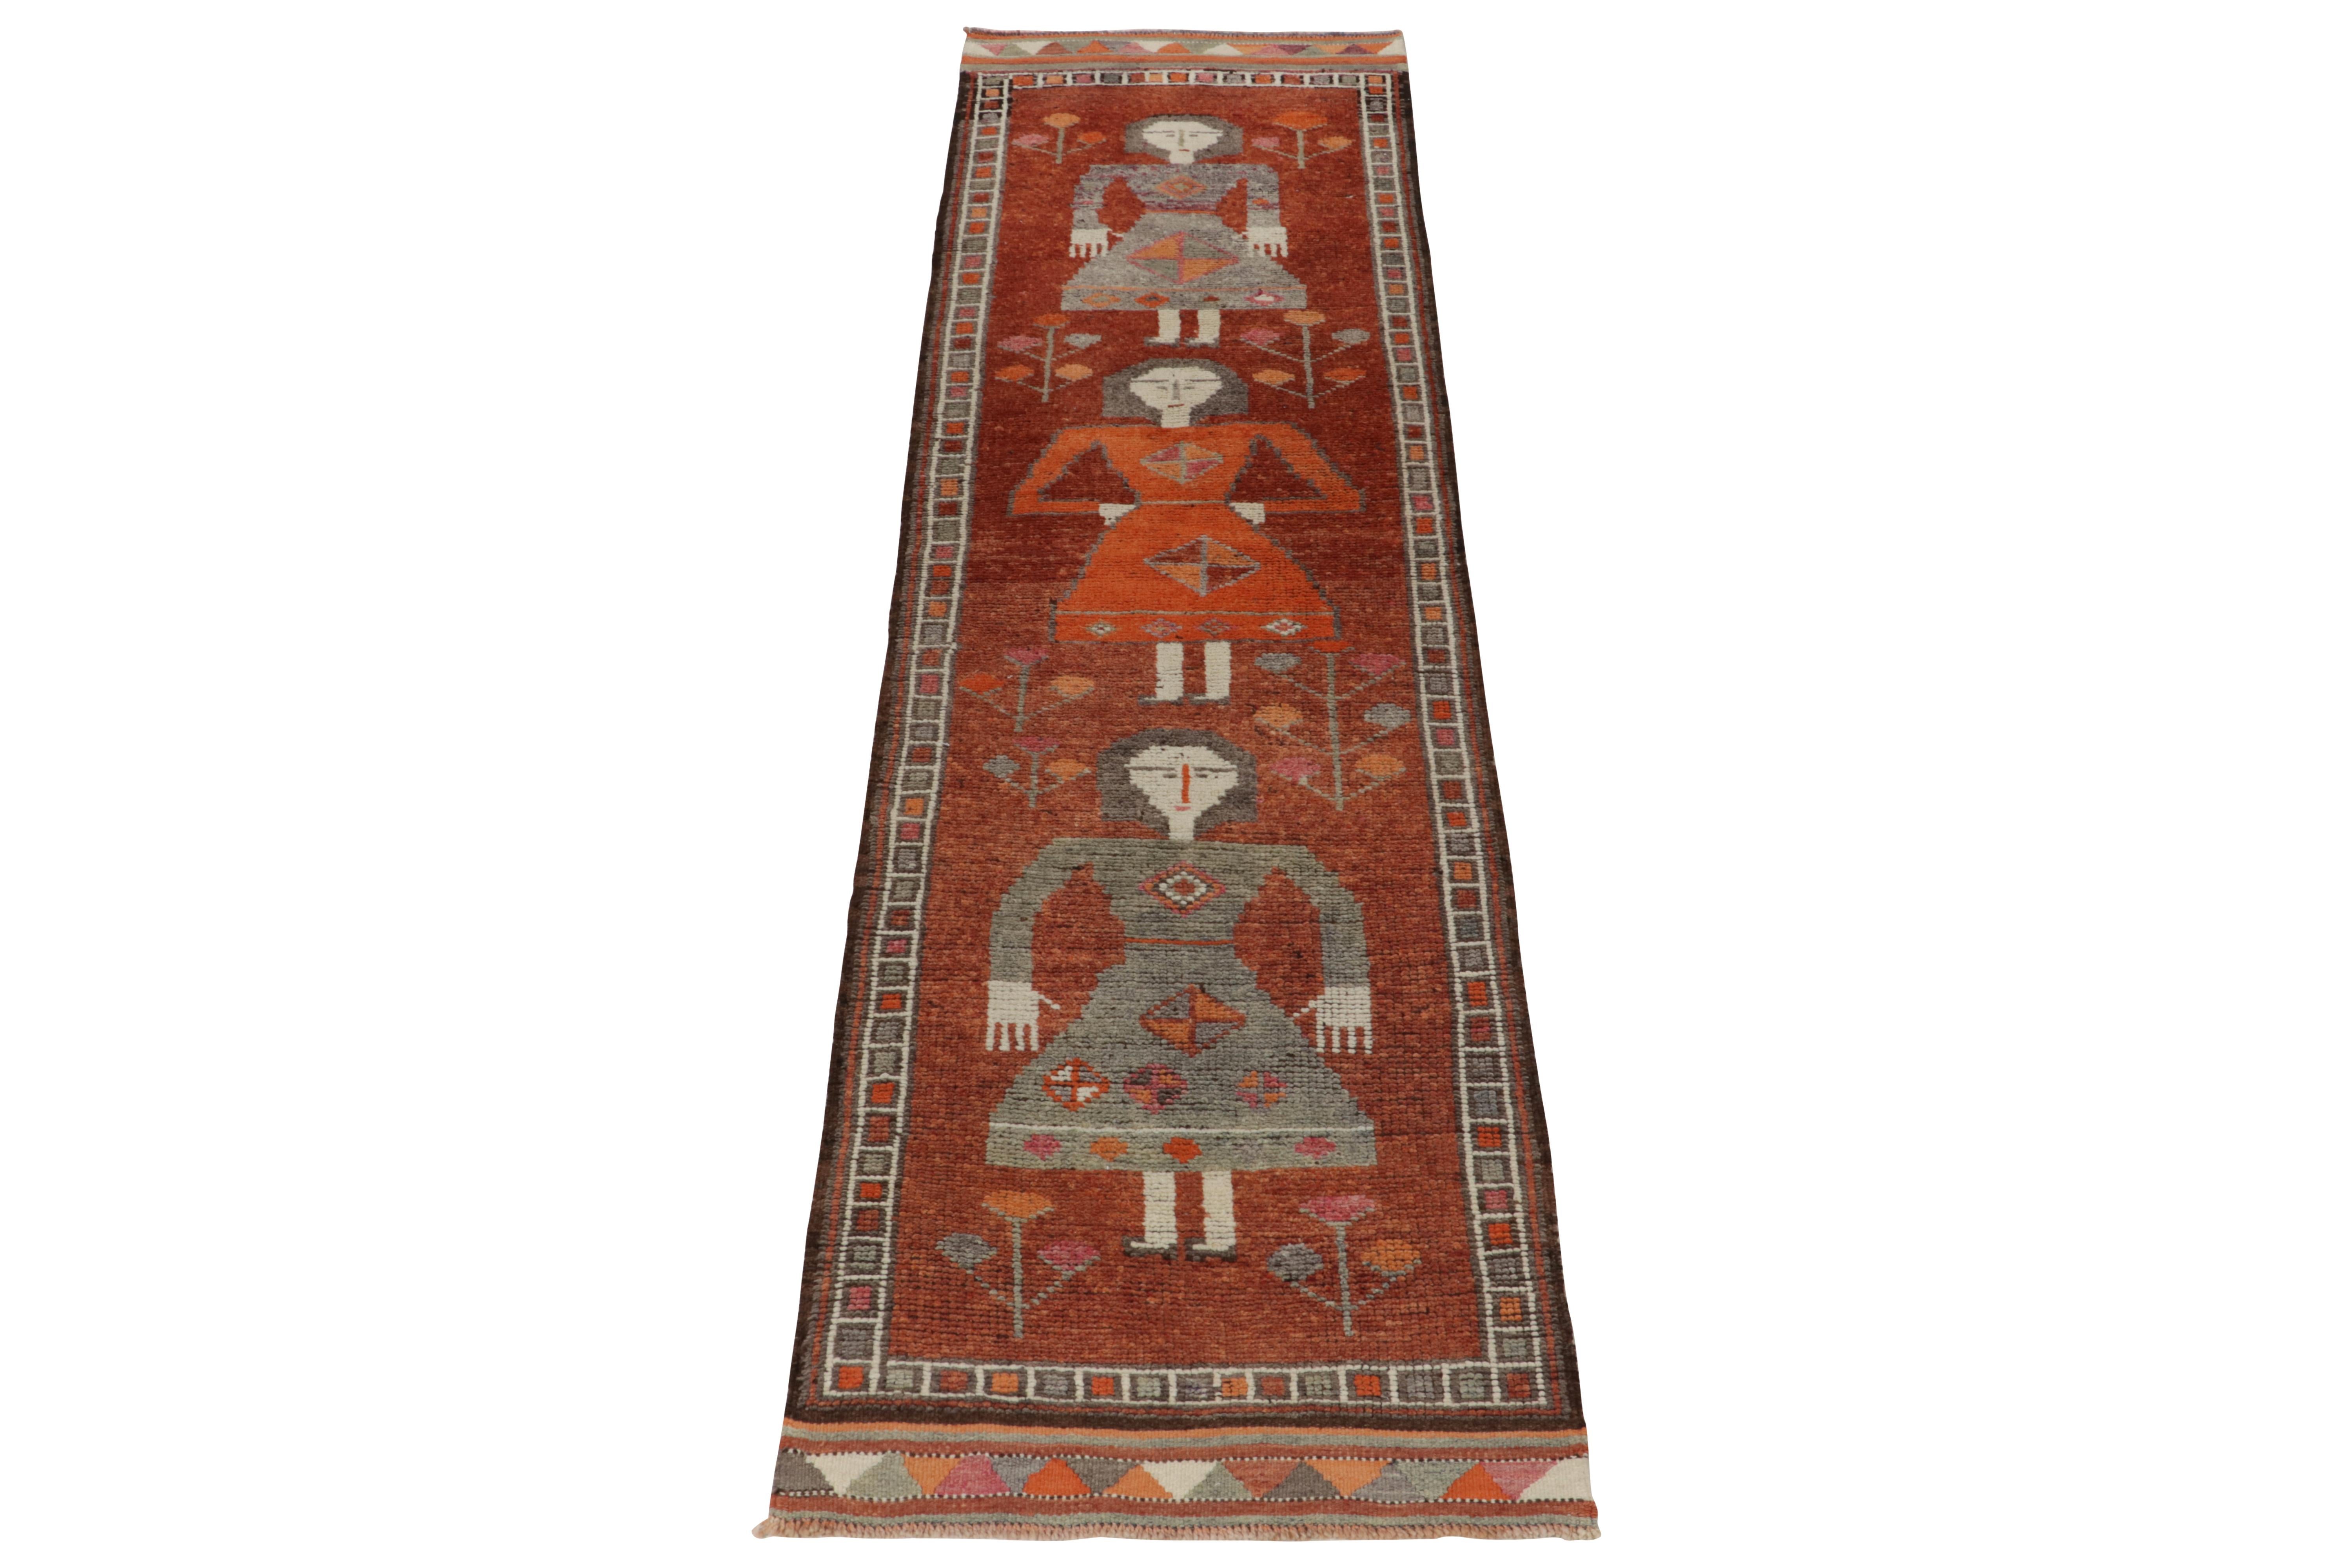 Hand-knotted in wool, a 3x12 runner from Rug & Kilim’s latest curation of the rarest tribal acquisitions. Originating from Turkey circa 1950-1960, a pictorial rug as rare in design as it is versatile in large size. 

The piece enjoys pictorial